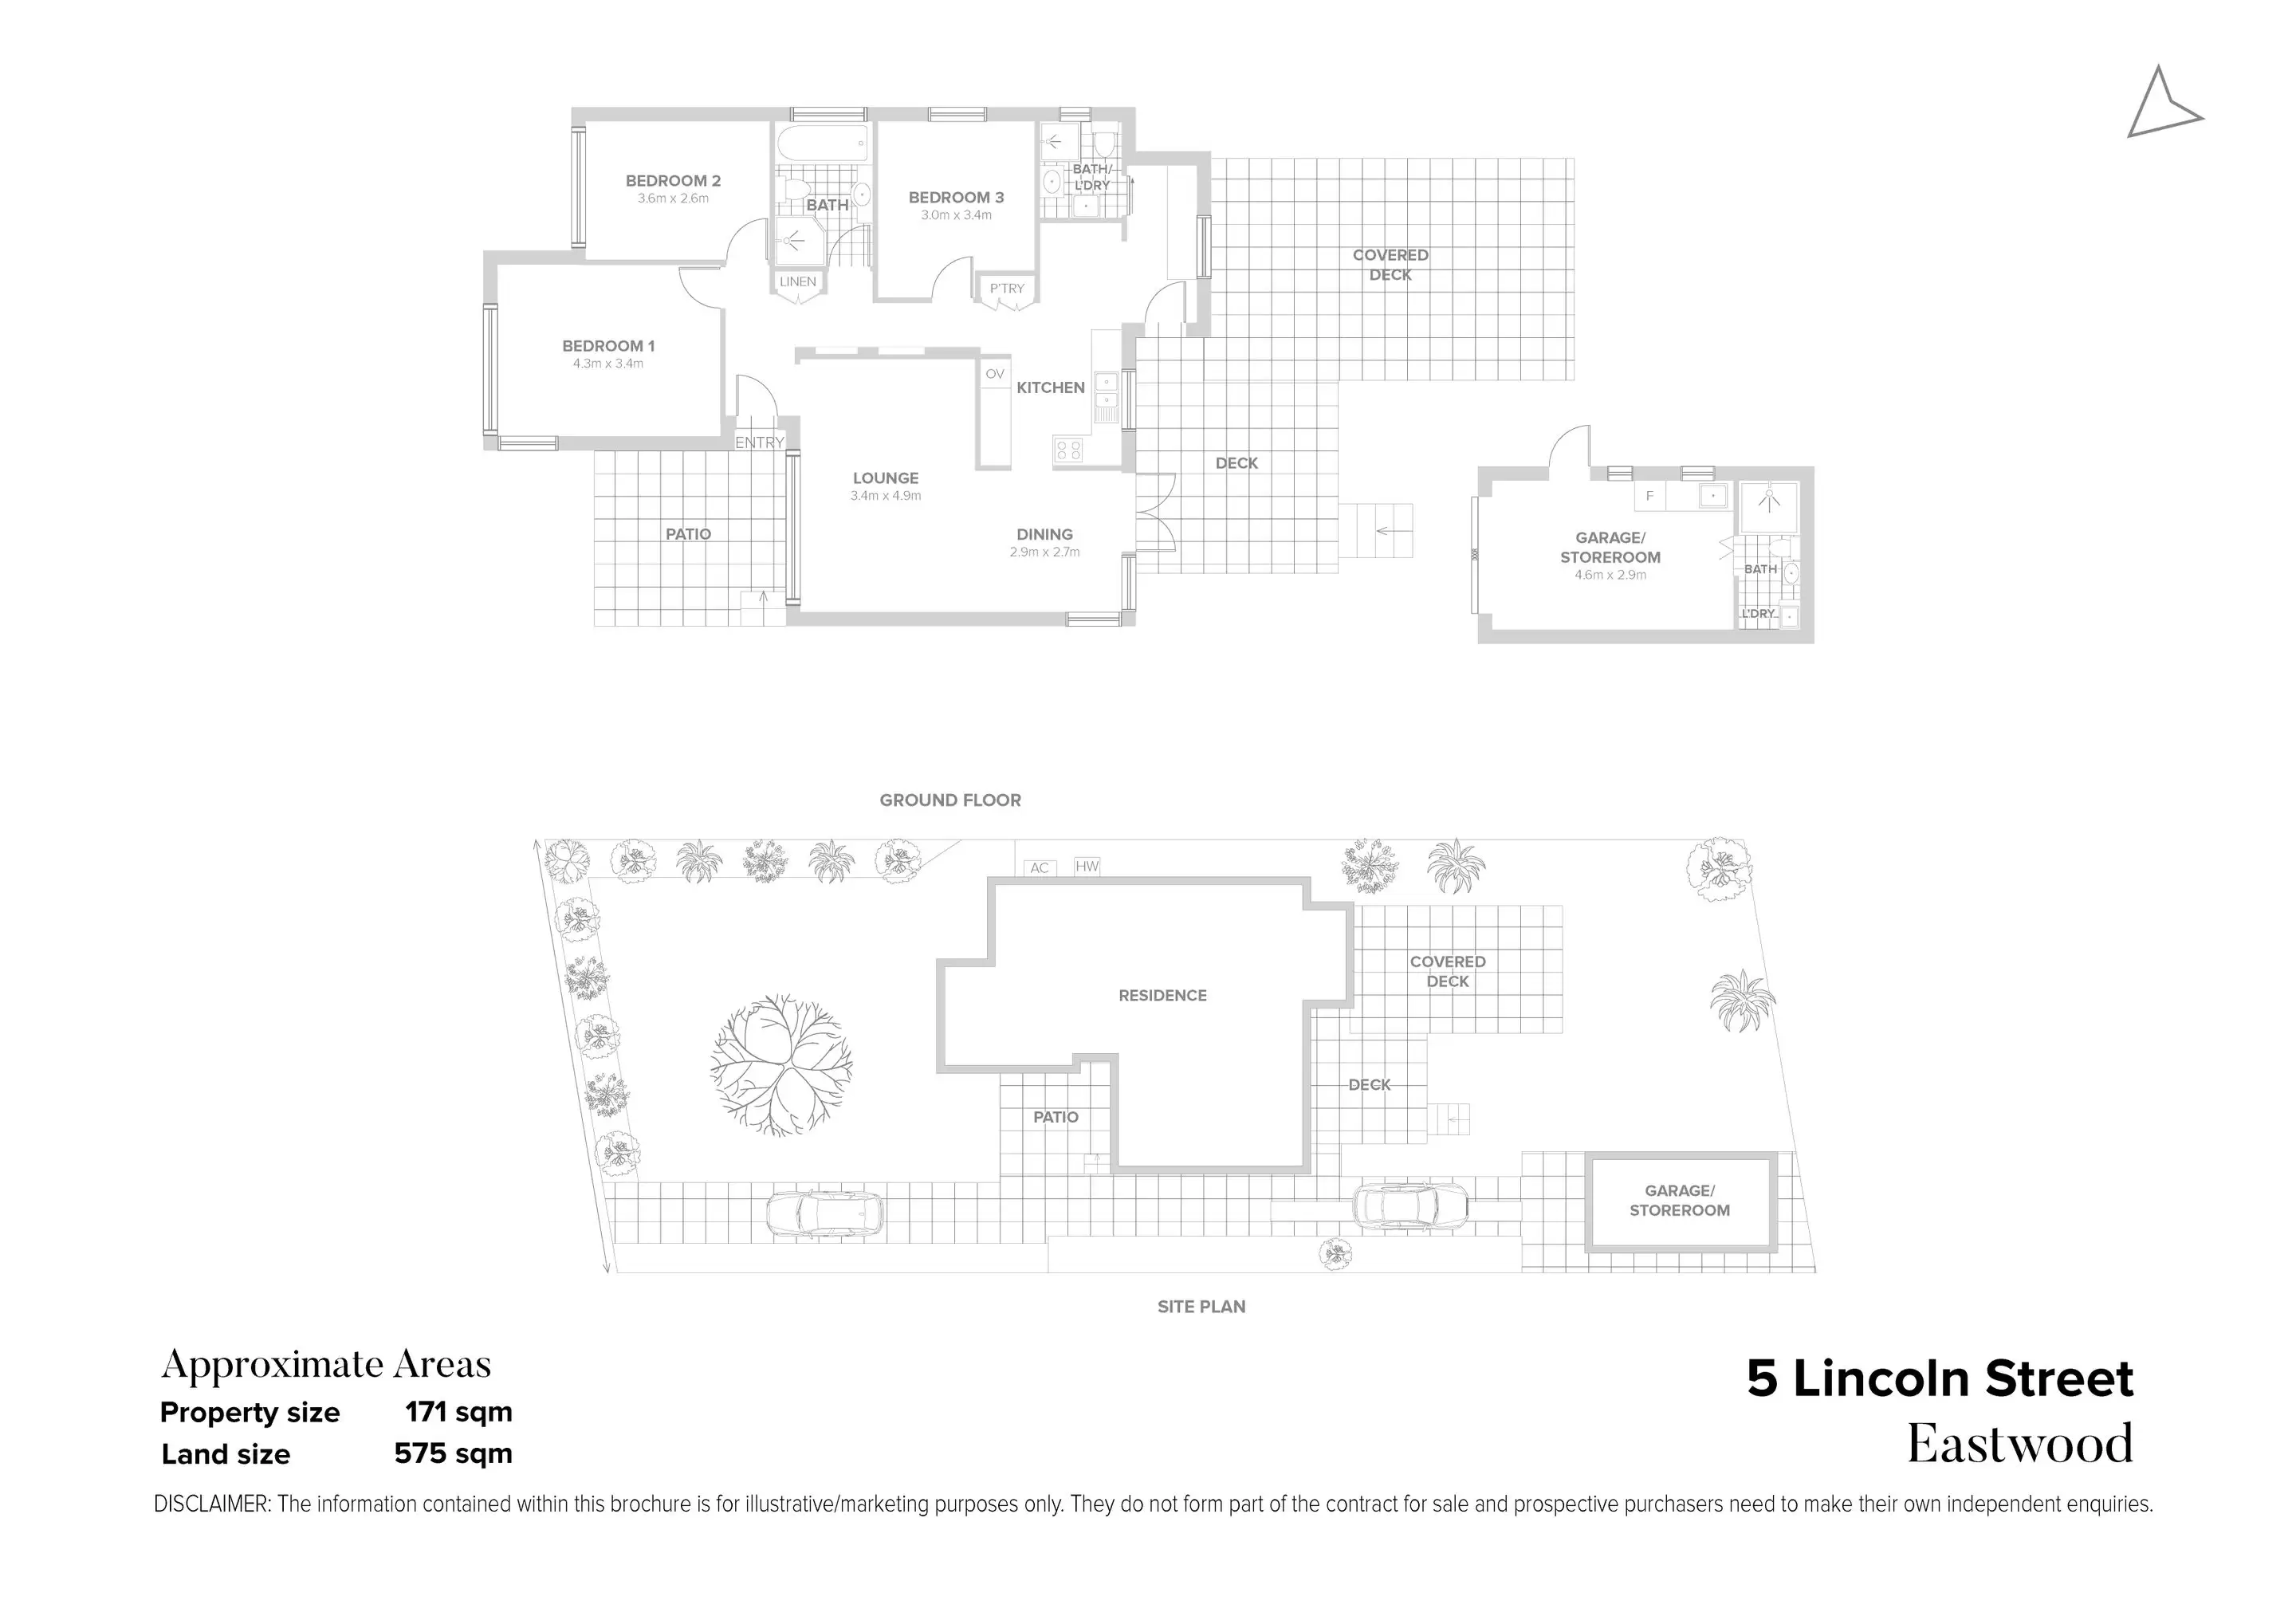 5 Lincoln Street, Eastwood Sold by Chidiac Realty - floorplan